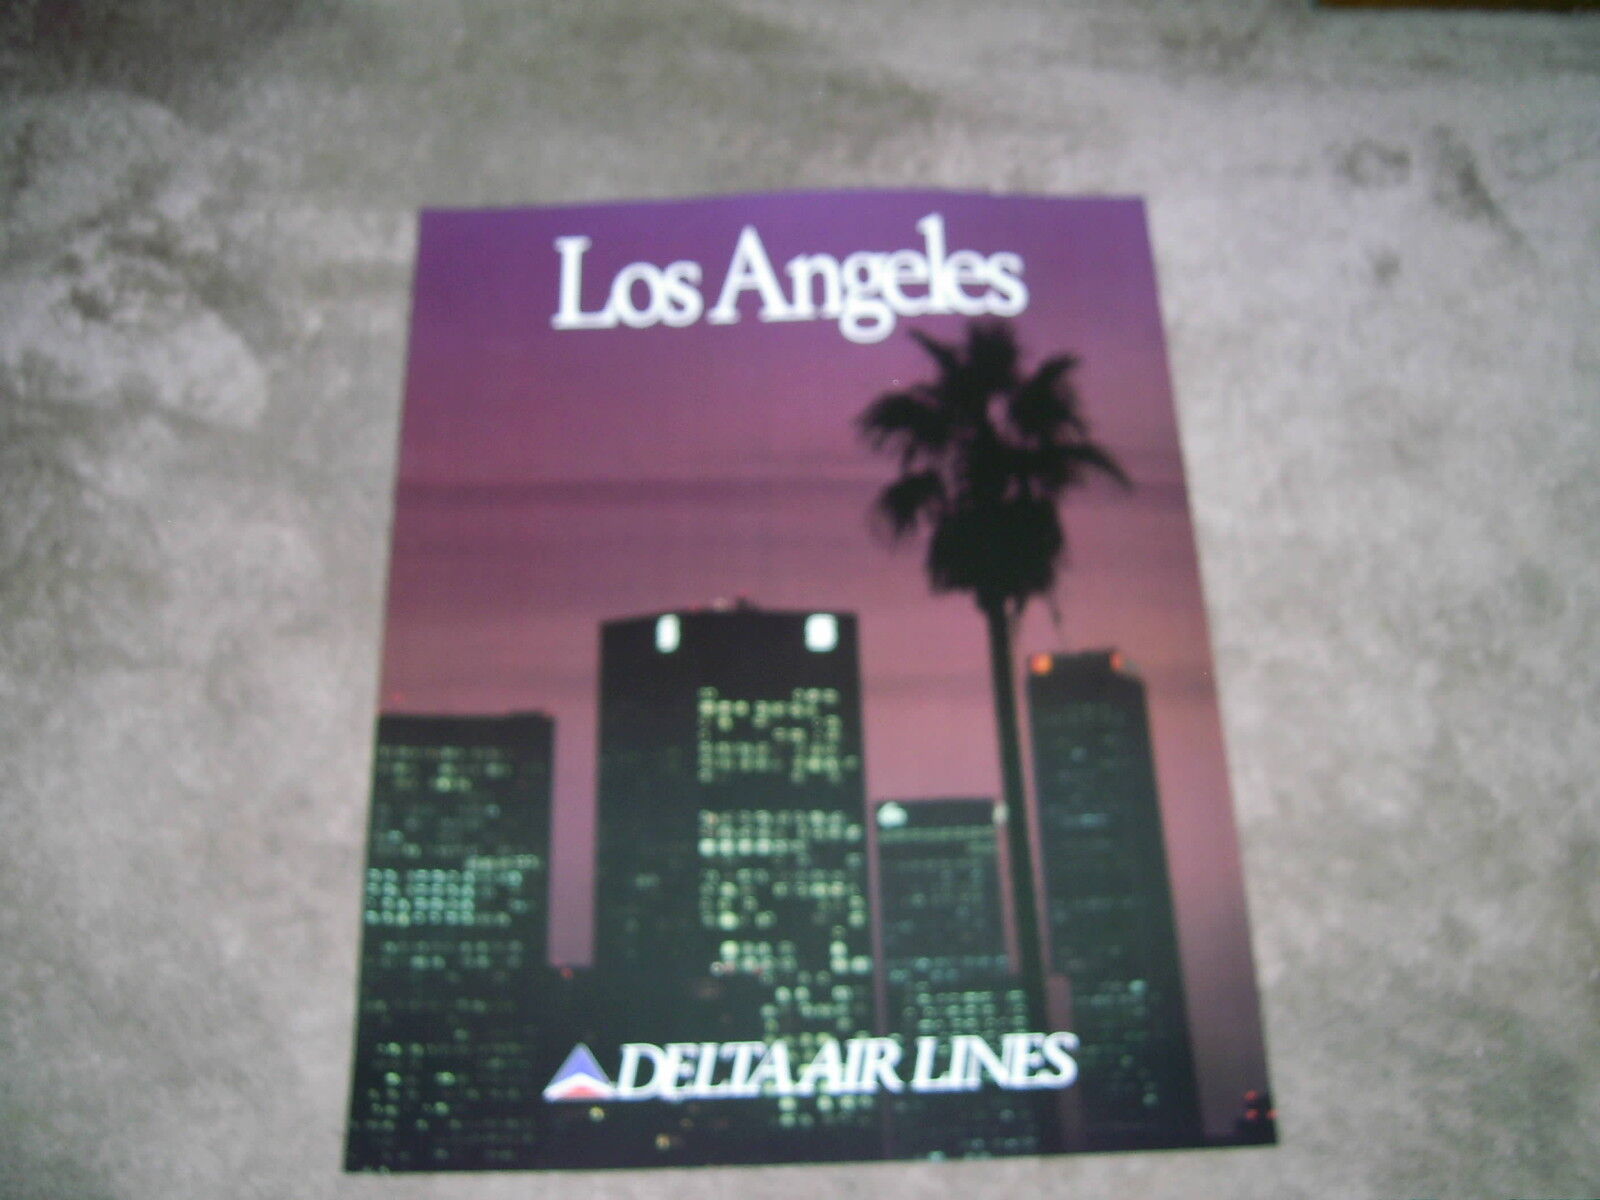 DELTA AIR LINES - LOS ANGELES - LARGE POSTER 28 x 22     